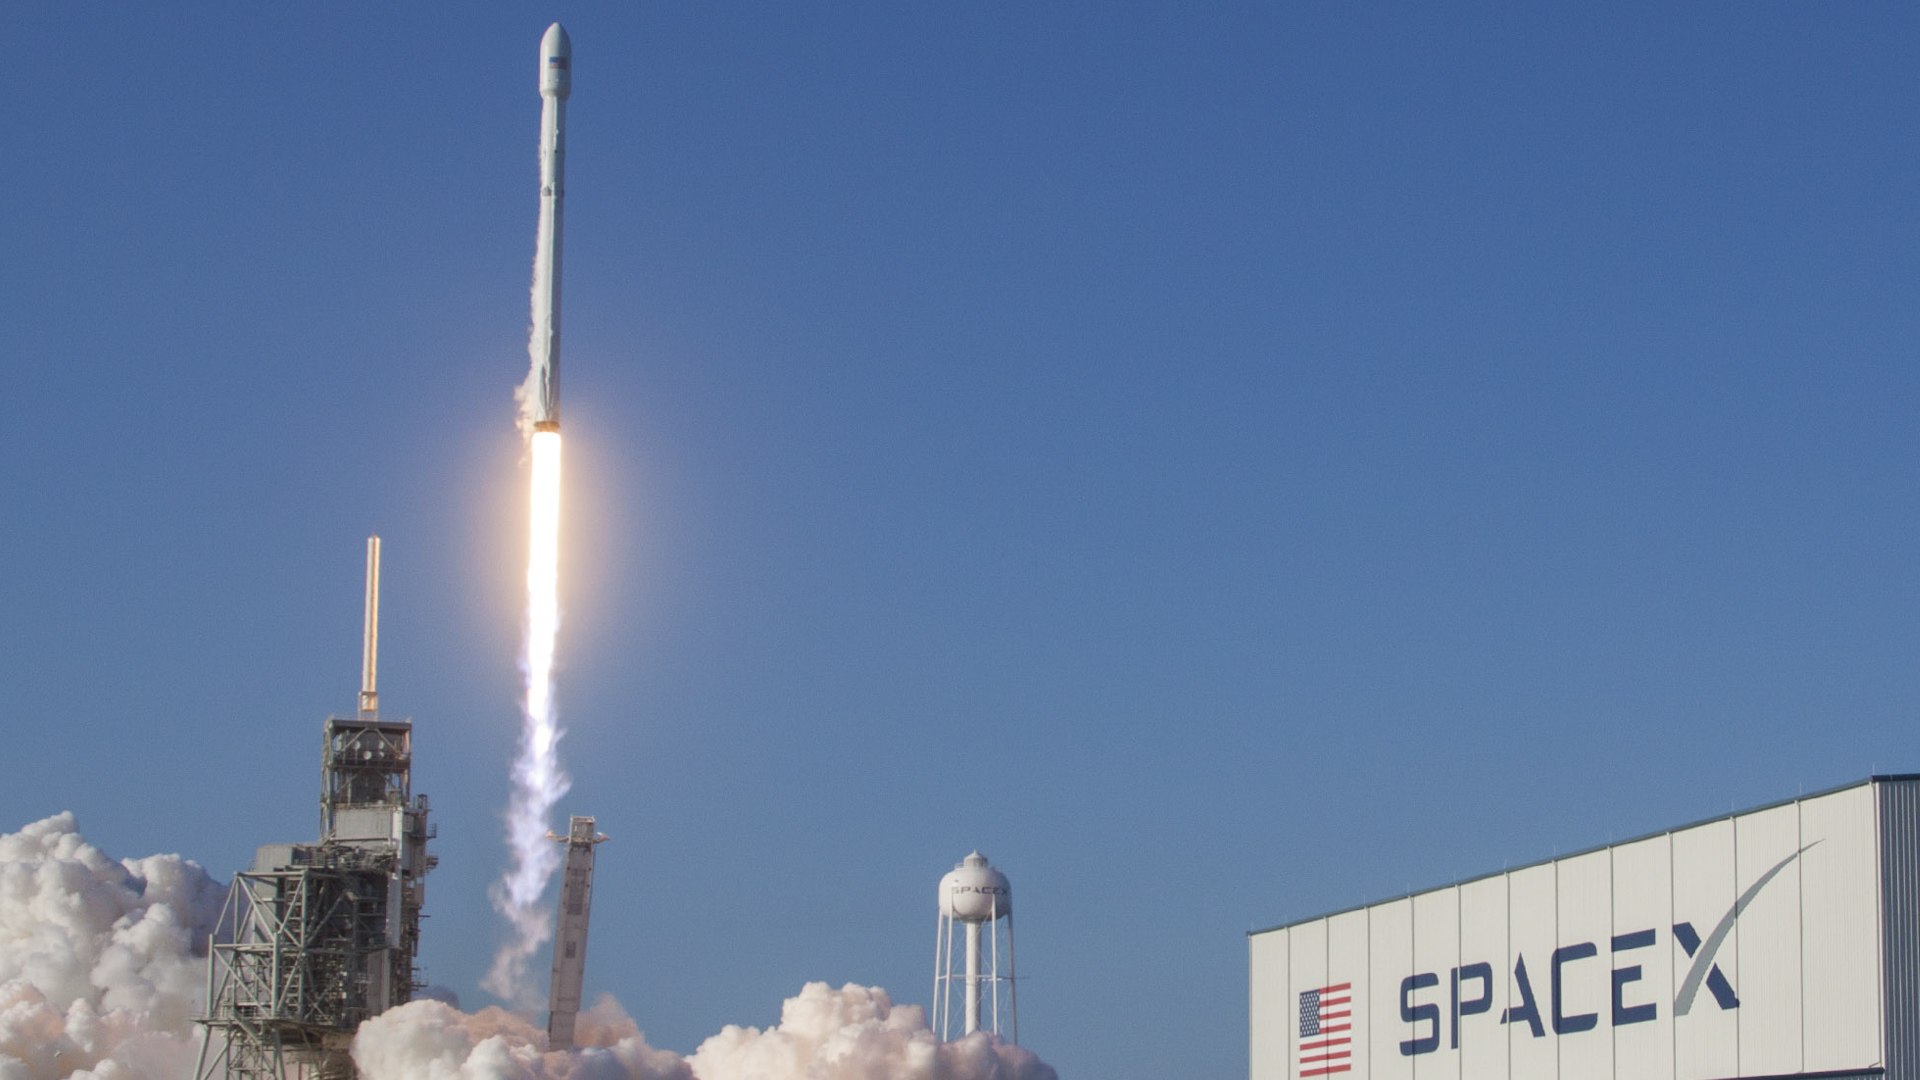 SpaceX has successfully launched a new era in spaceflight with the successful completion of its Falc